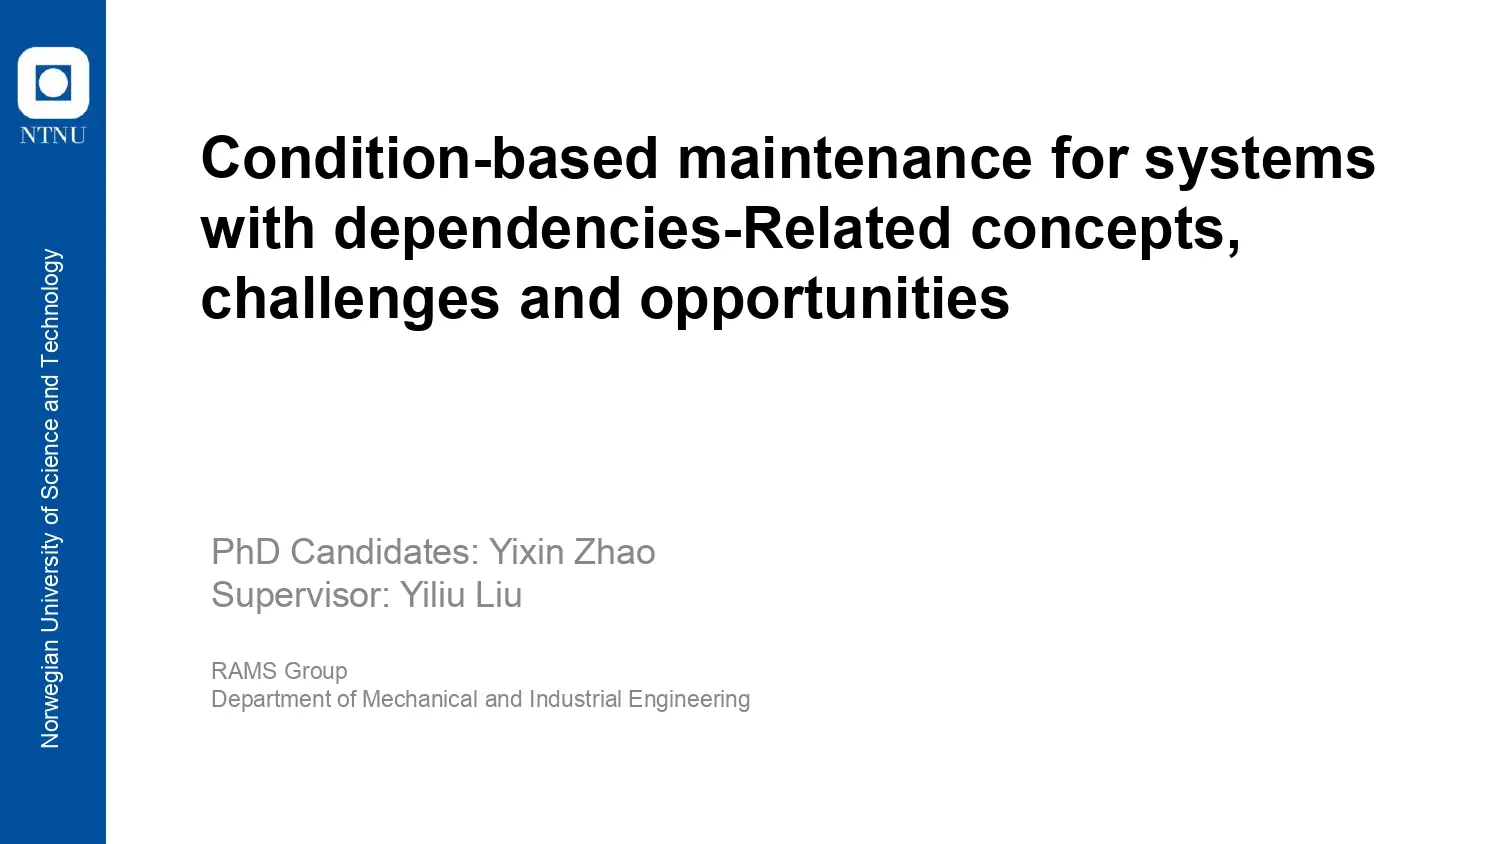 Condition-Based Maintenance for Systems with Dependencies- Related Concepts, Challenges and Opportunities